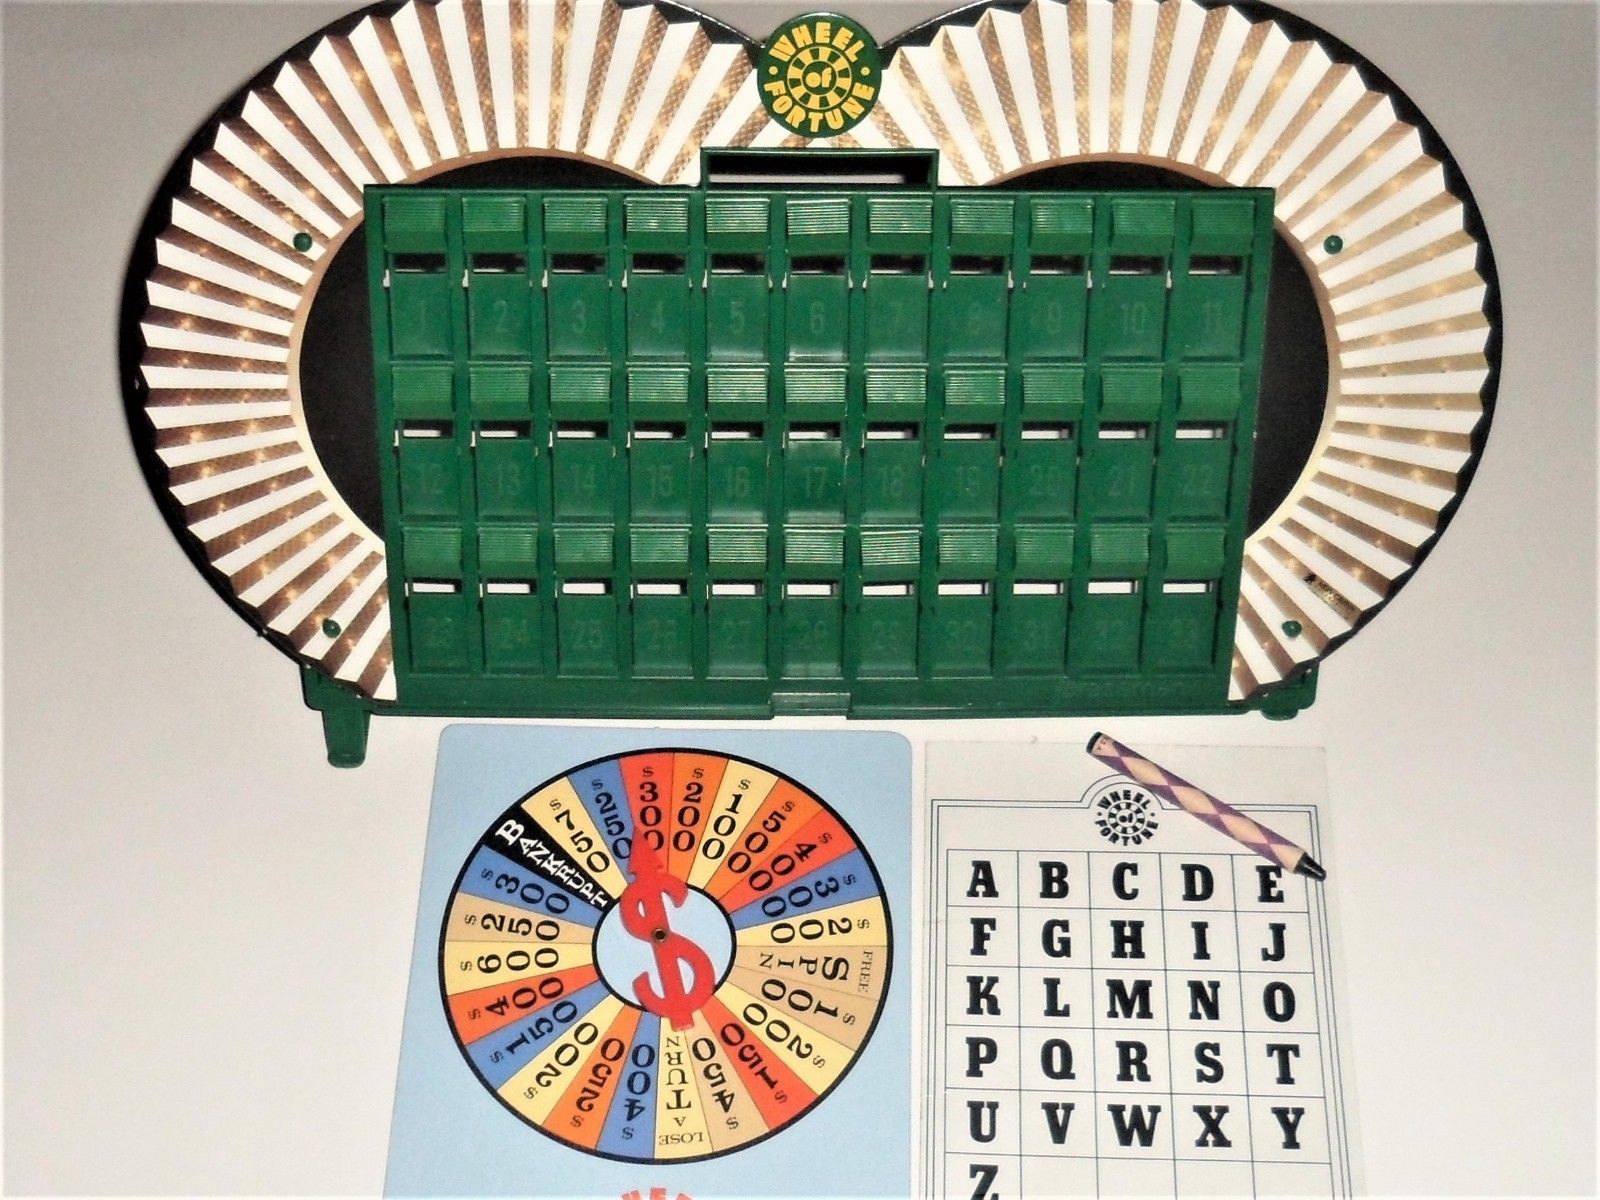 1985 wheel of fortune board game